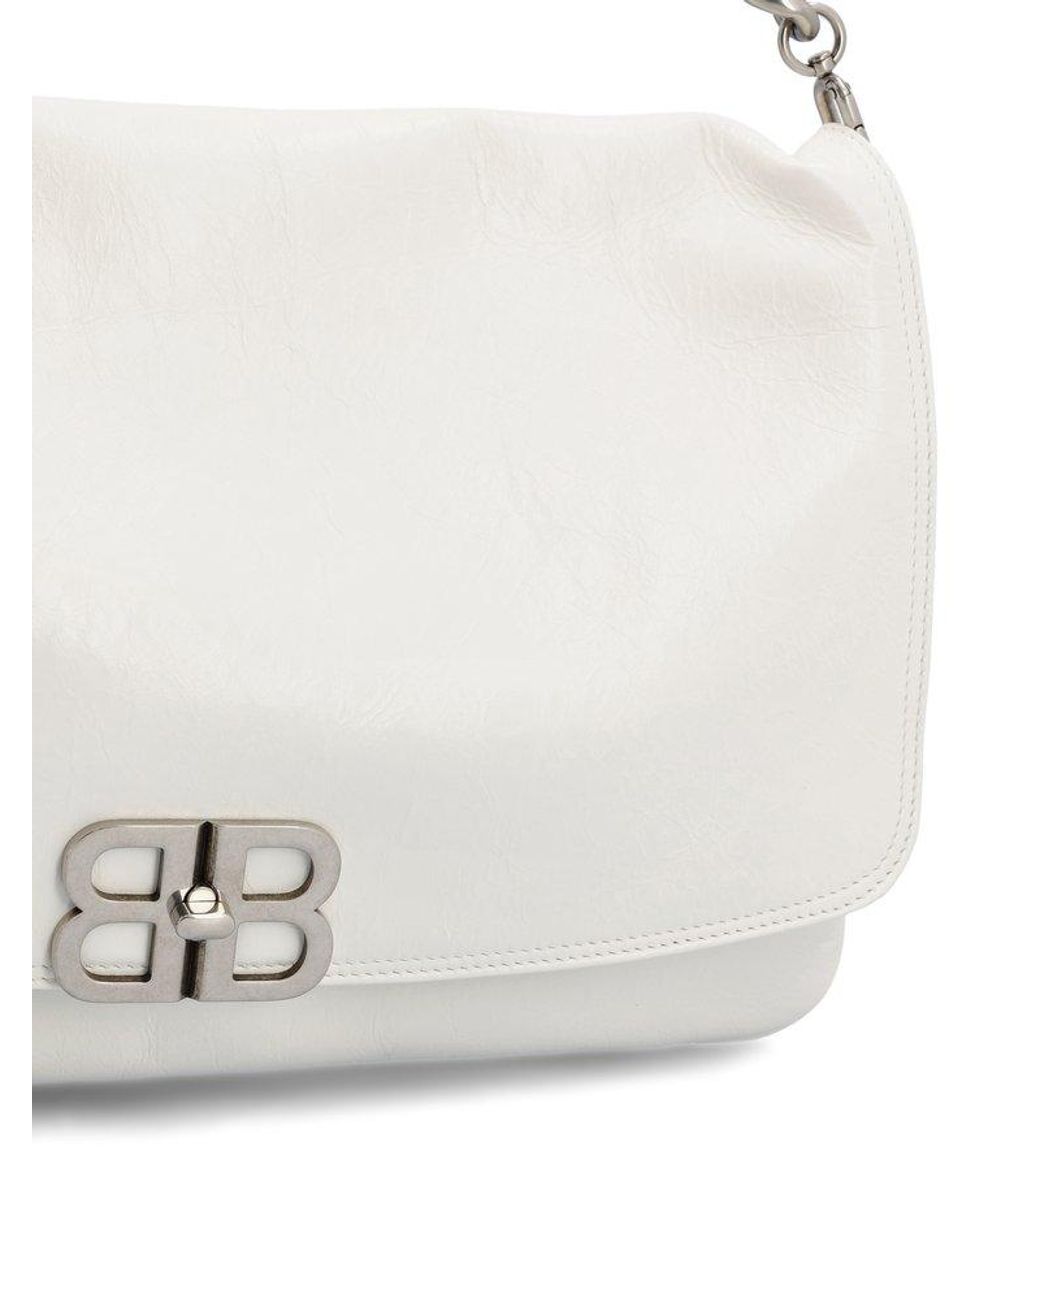 Buy Balenciaga BB Soft bag in white soft leather at the Park